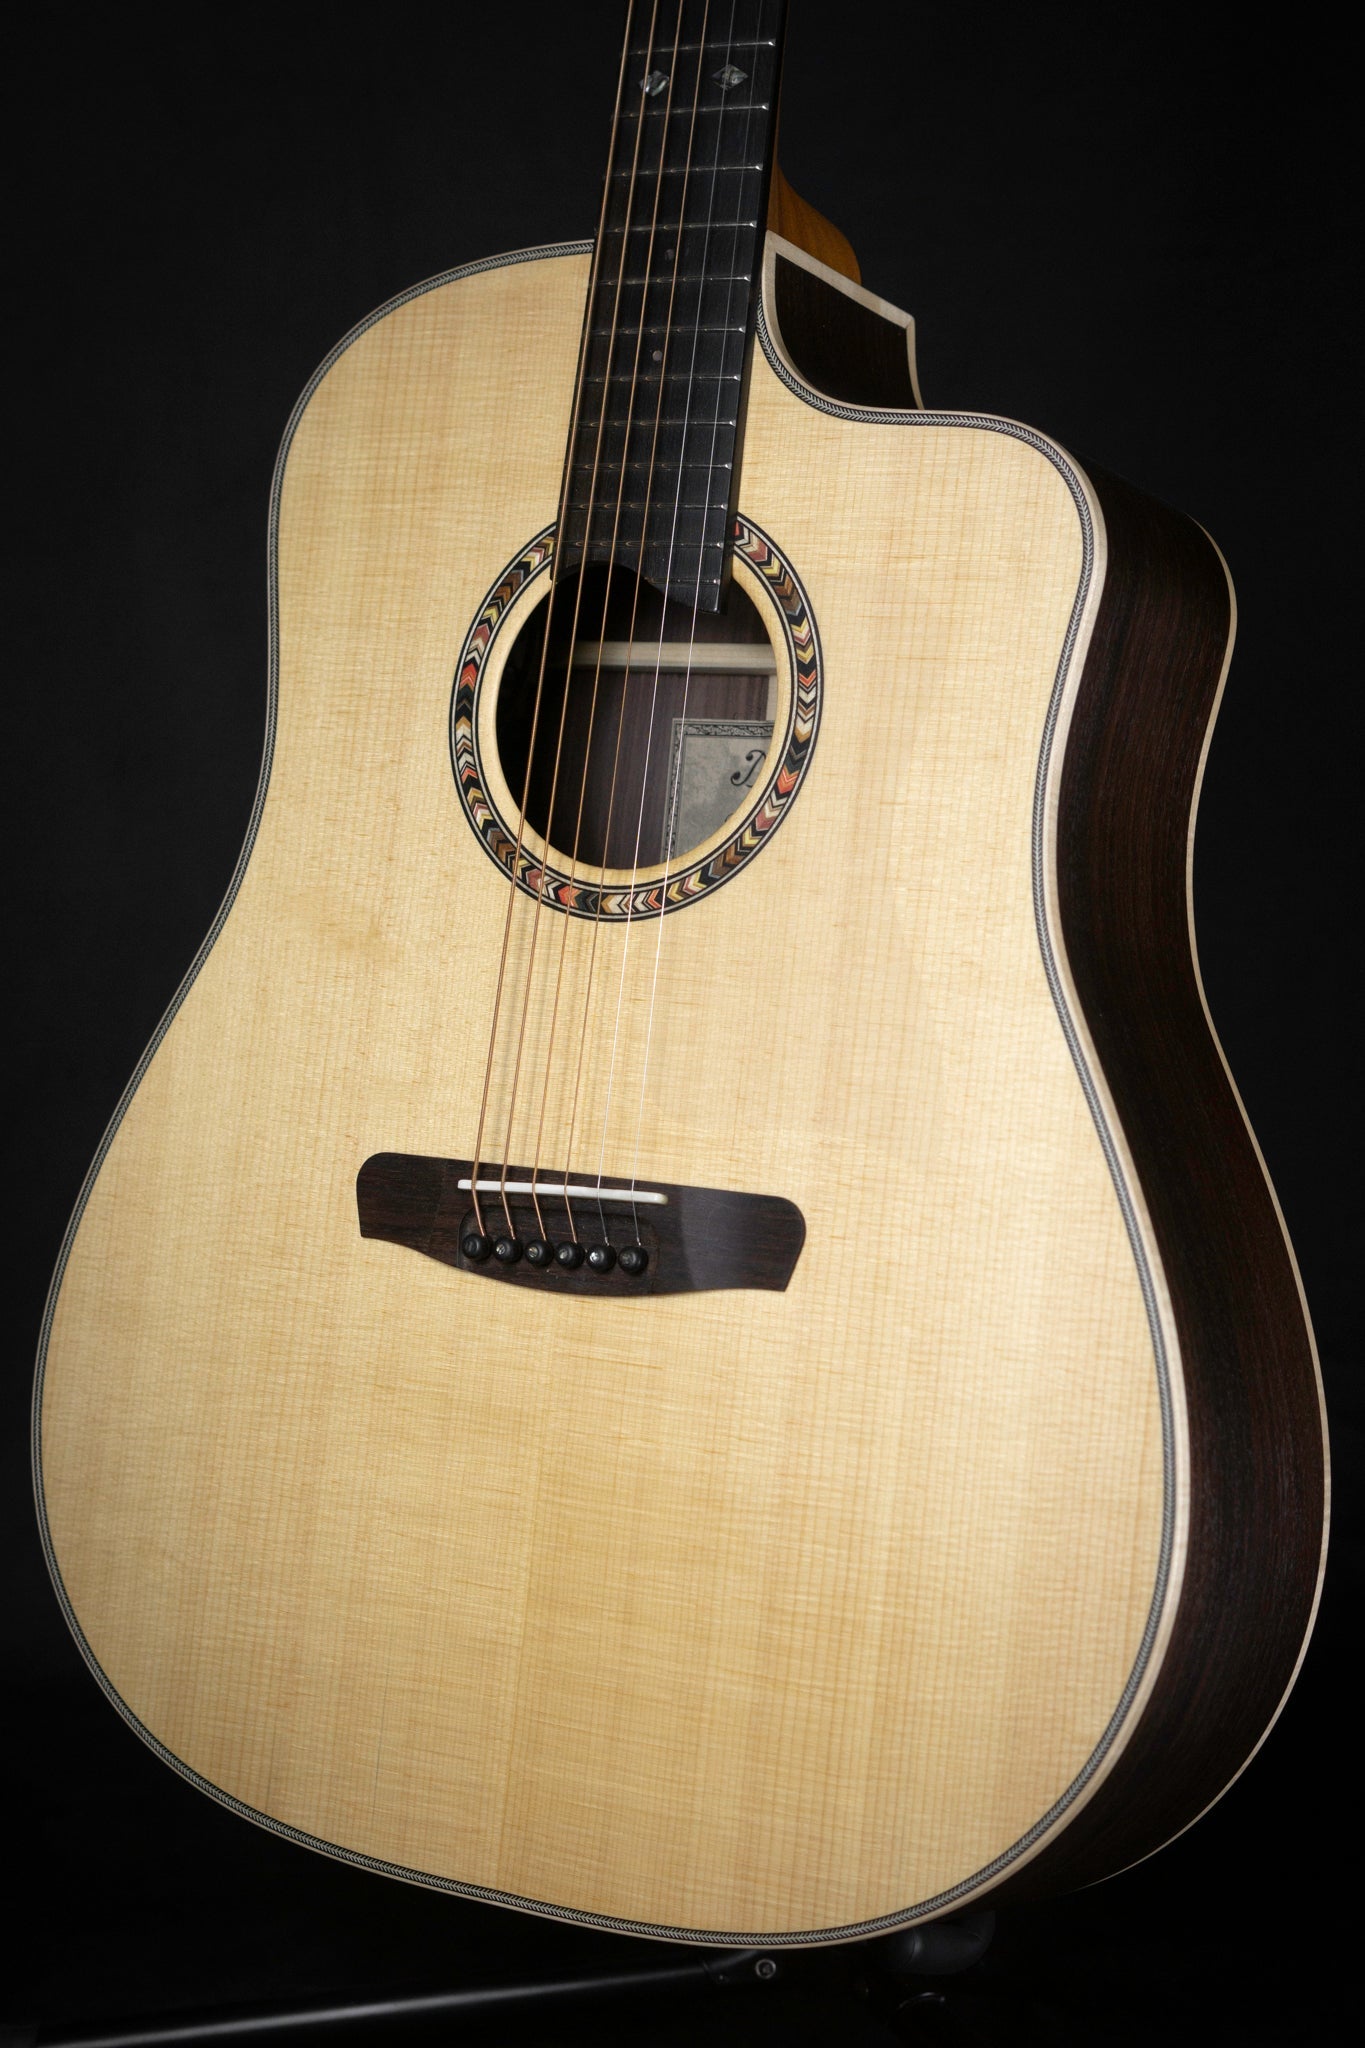 Dowina Cabernet DCE Acoustic Guitar Body Angled